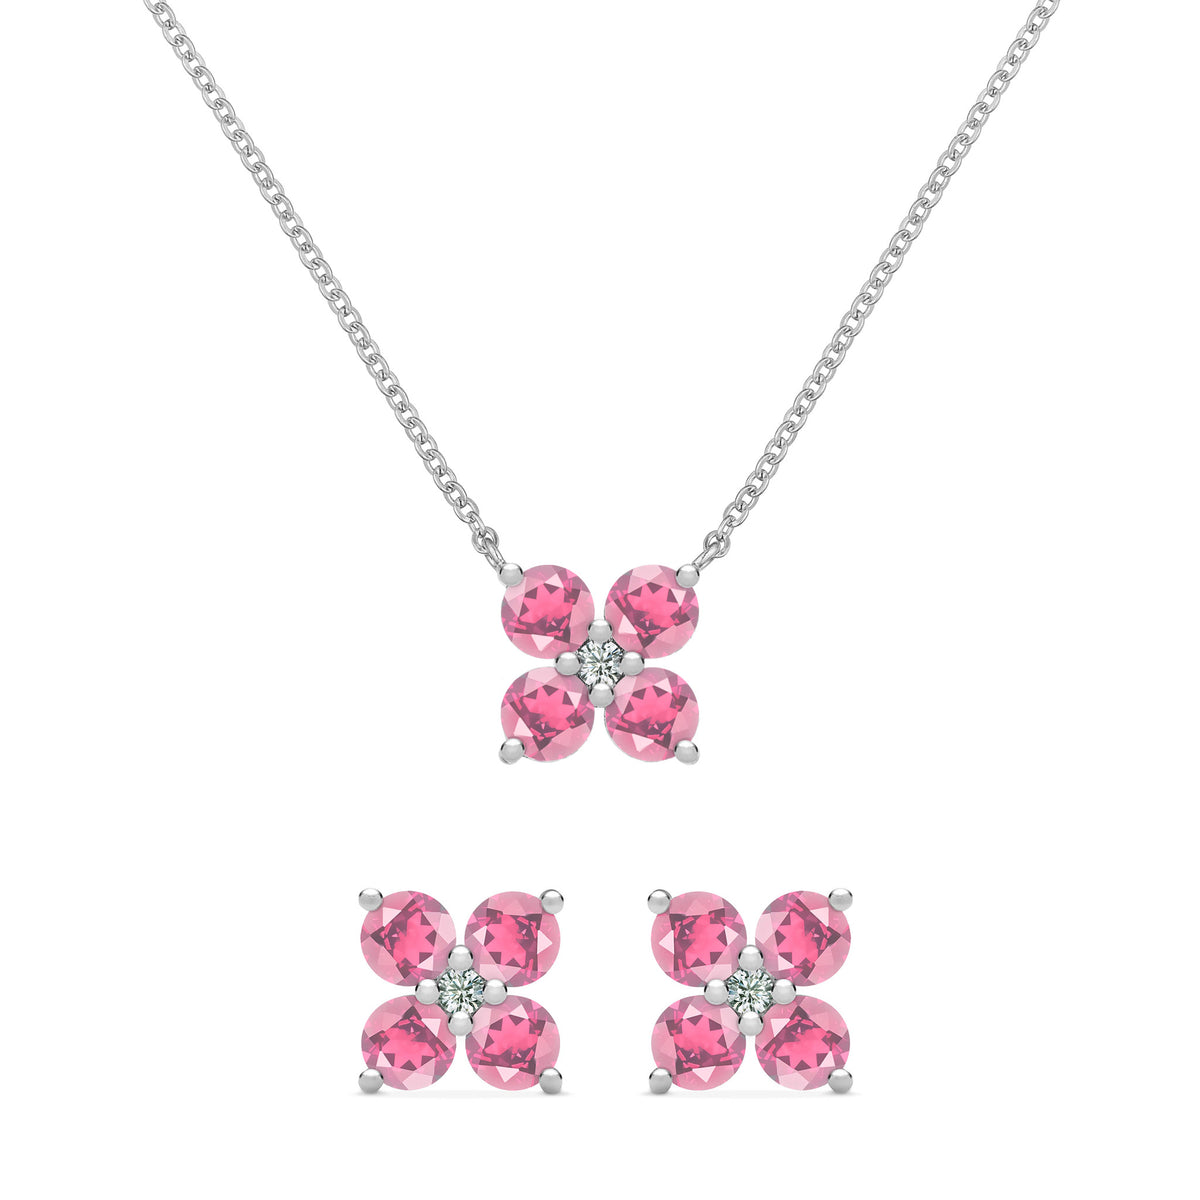 Haverhill Leach, Inc Greenwich 4 Pink Tourmaline and Diamond Necklace and